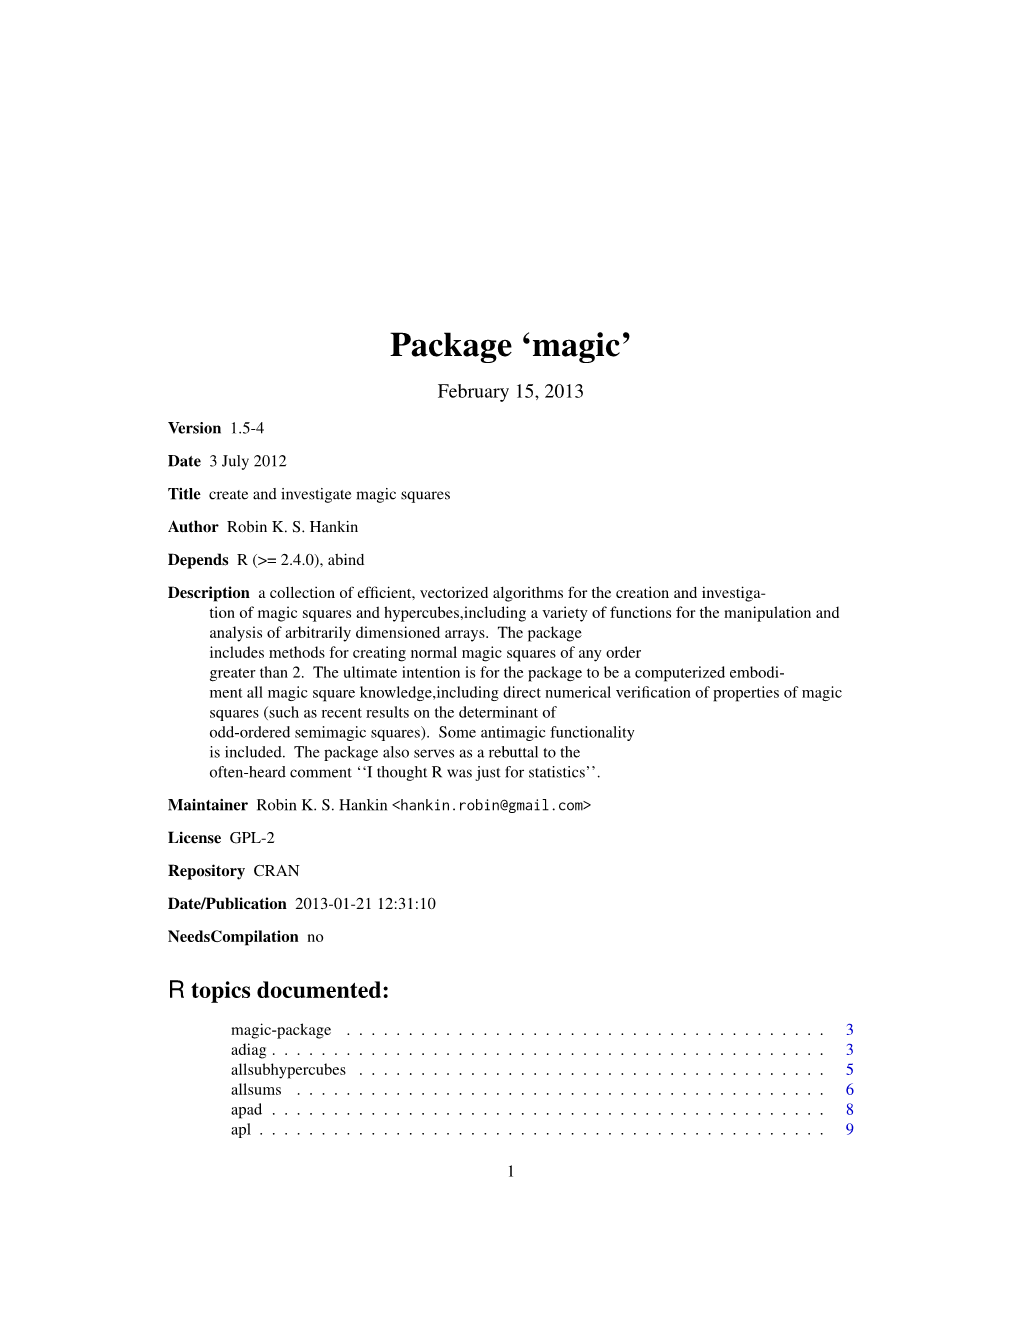 Package 'Magic'